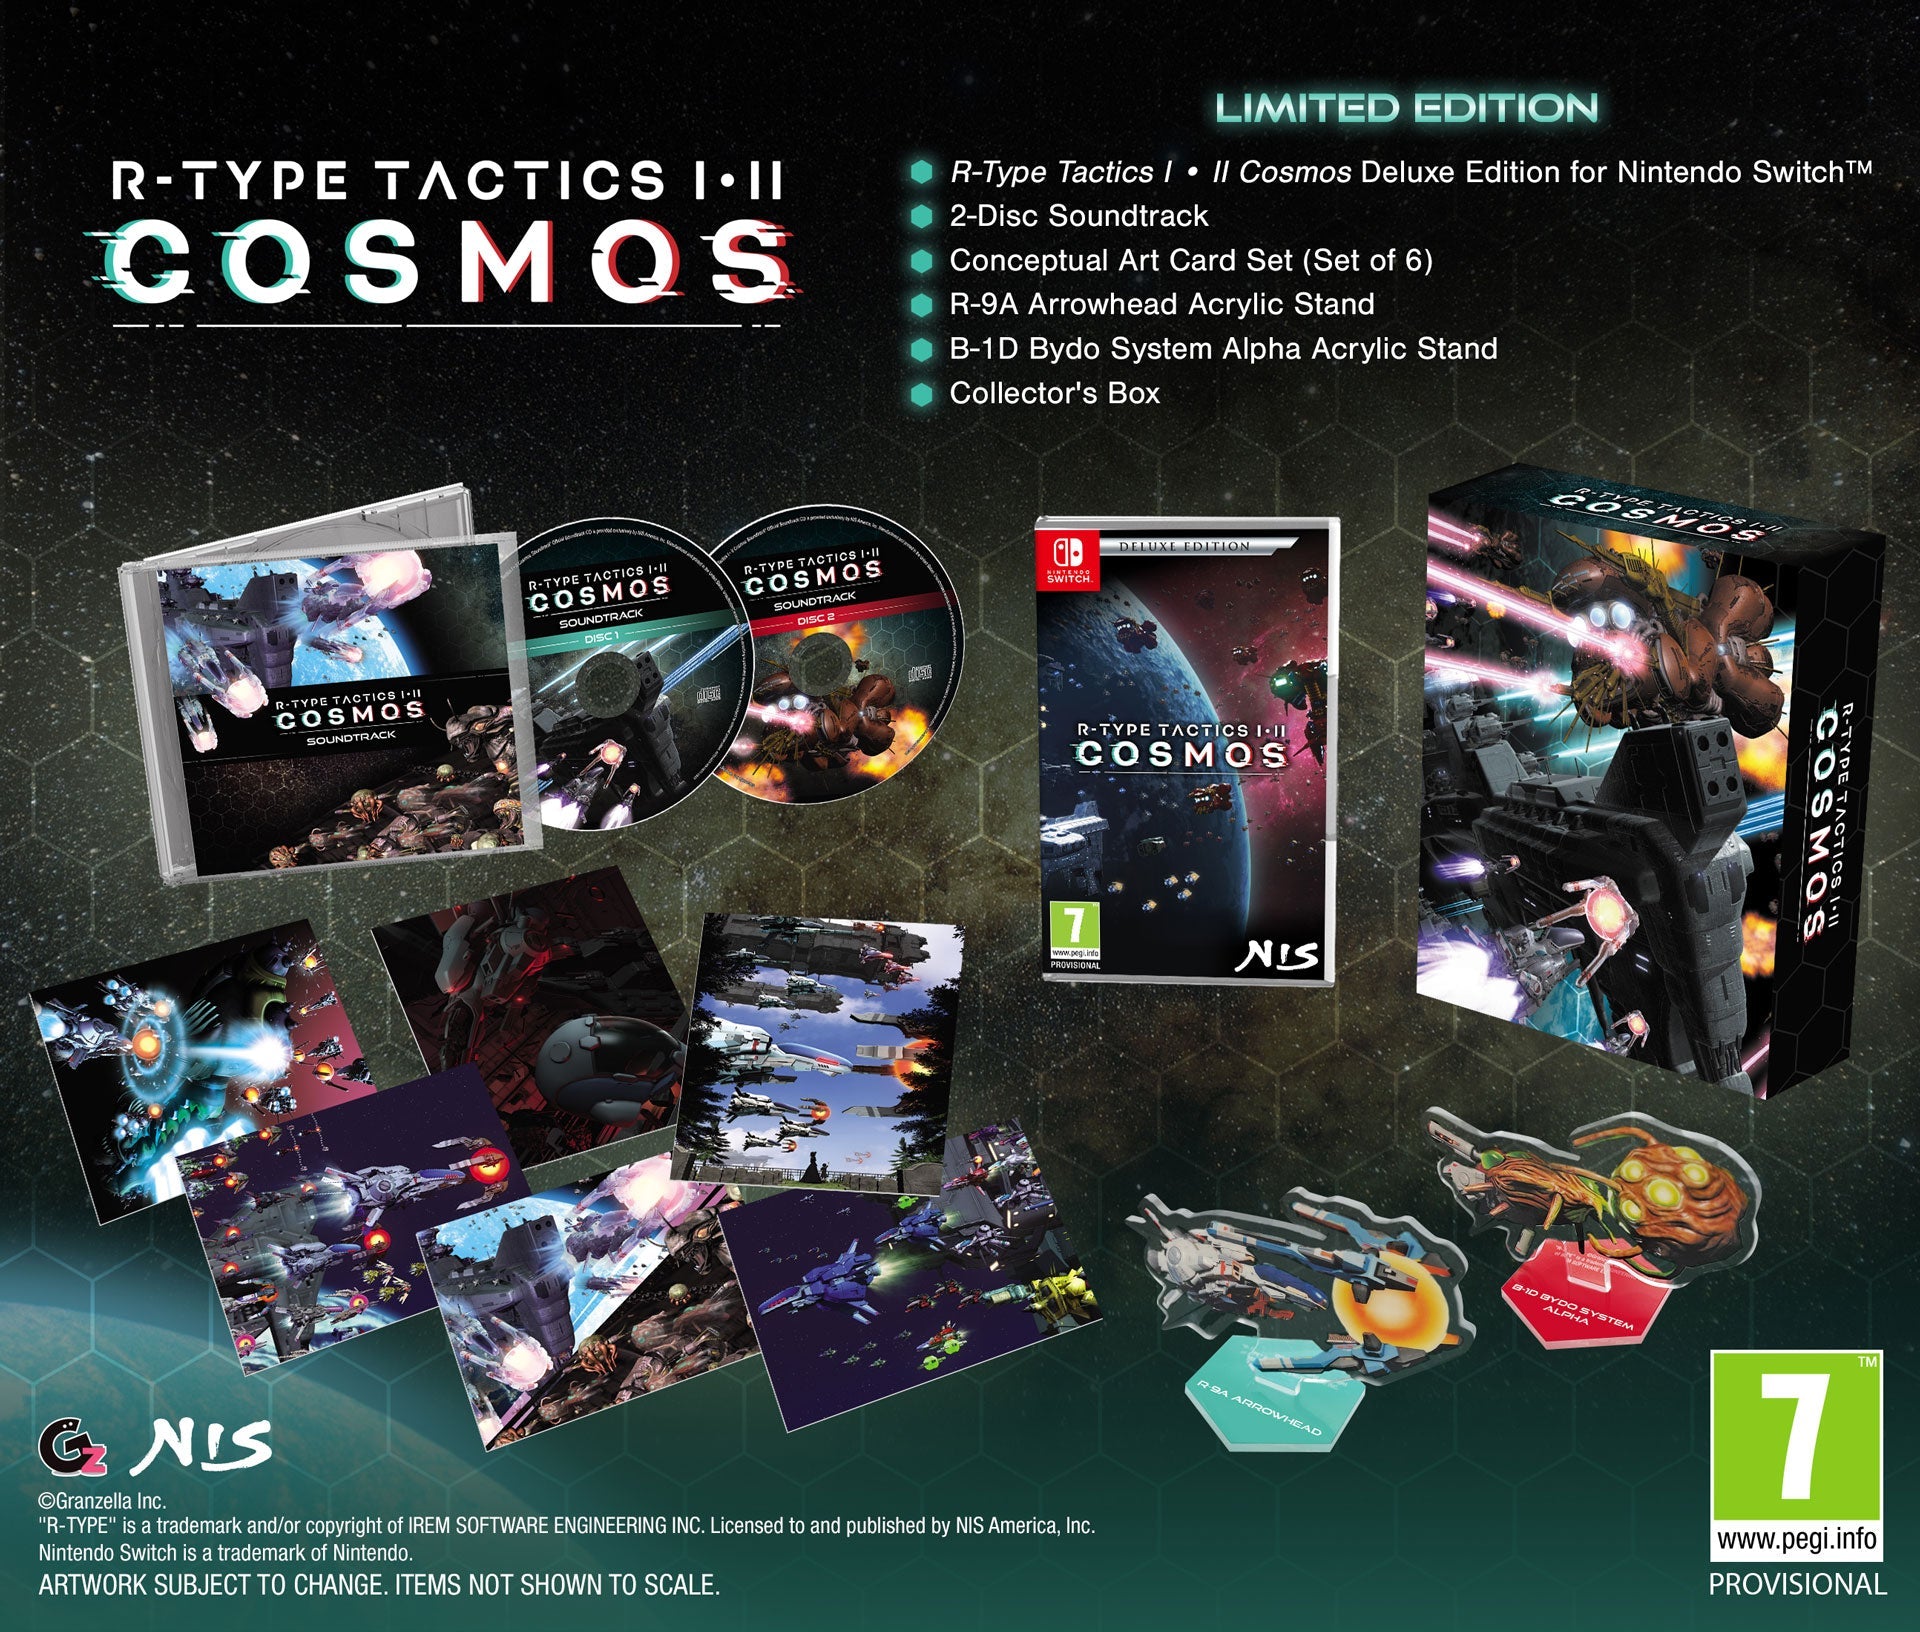 R-Type Tactics I • II COSMOS - Limited Edition - Nintendo Switch™